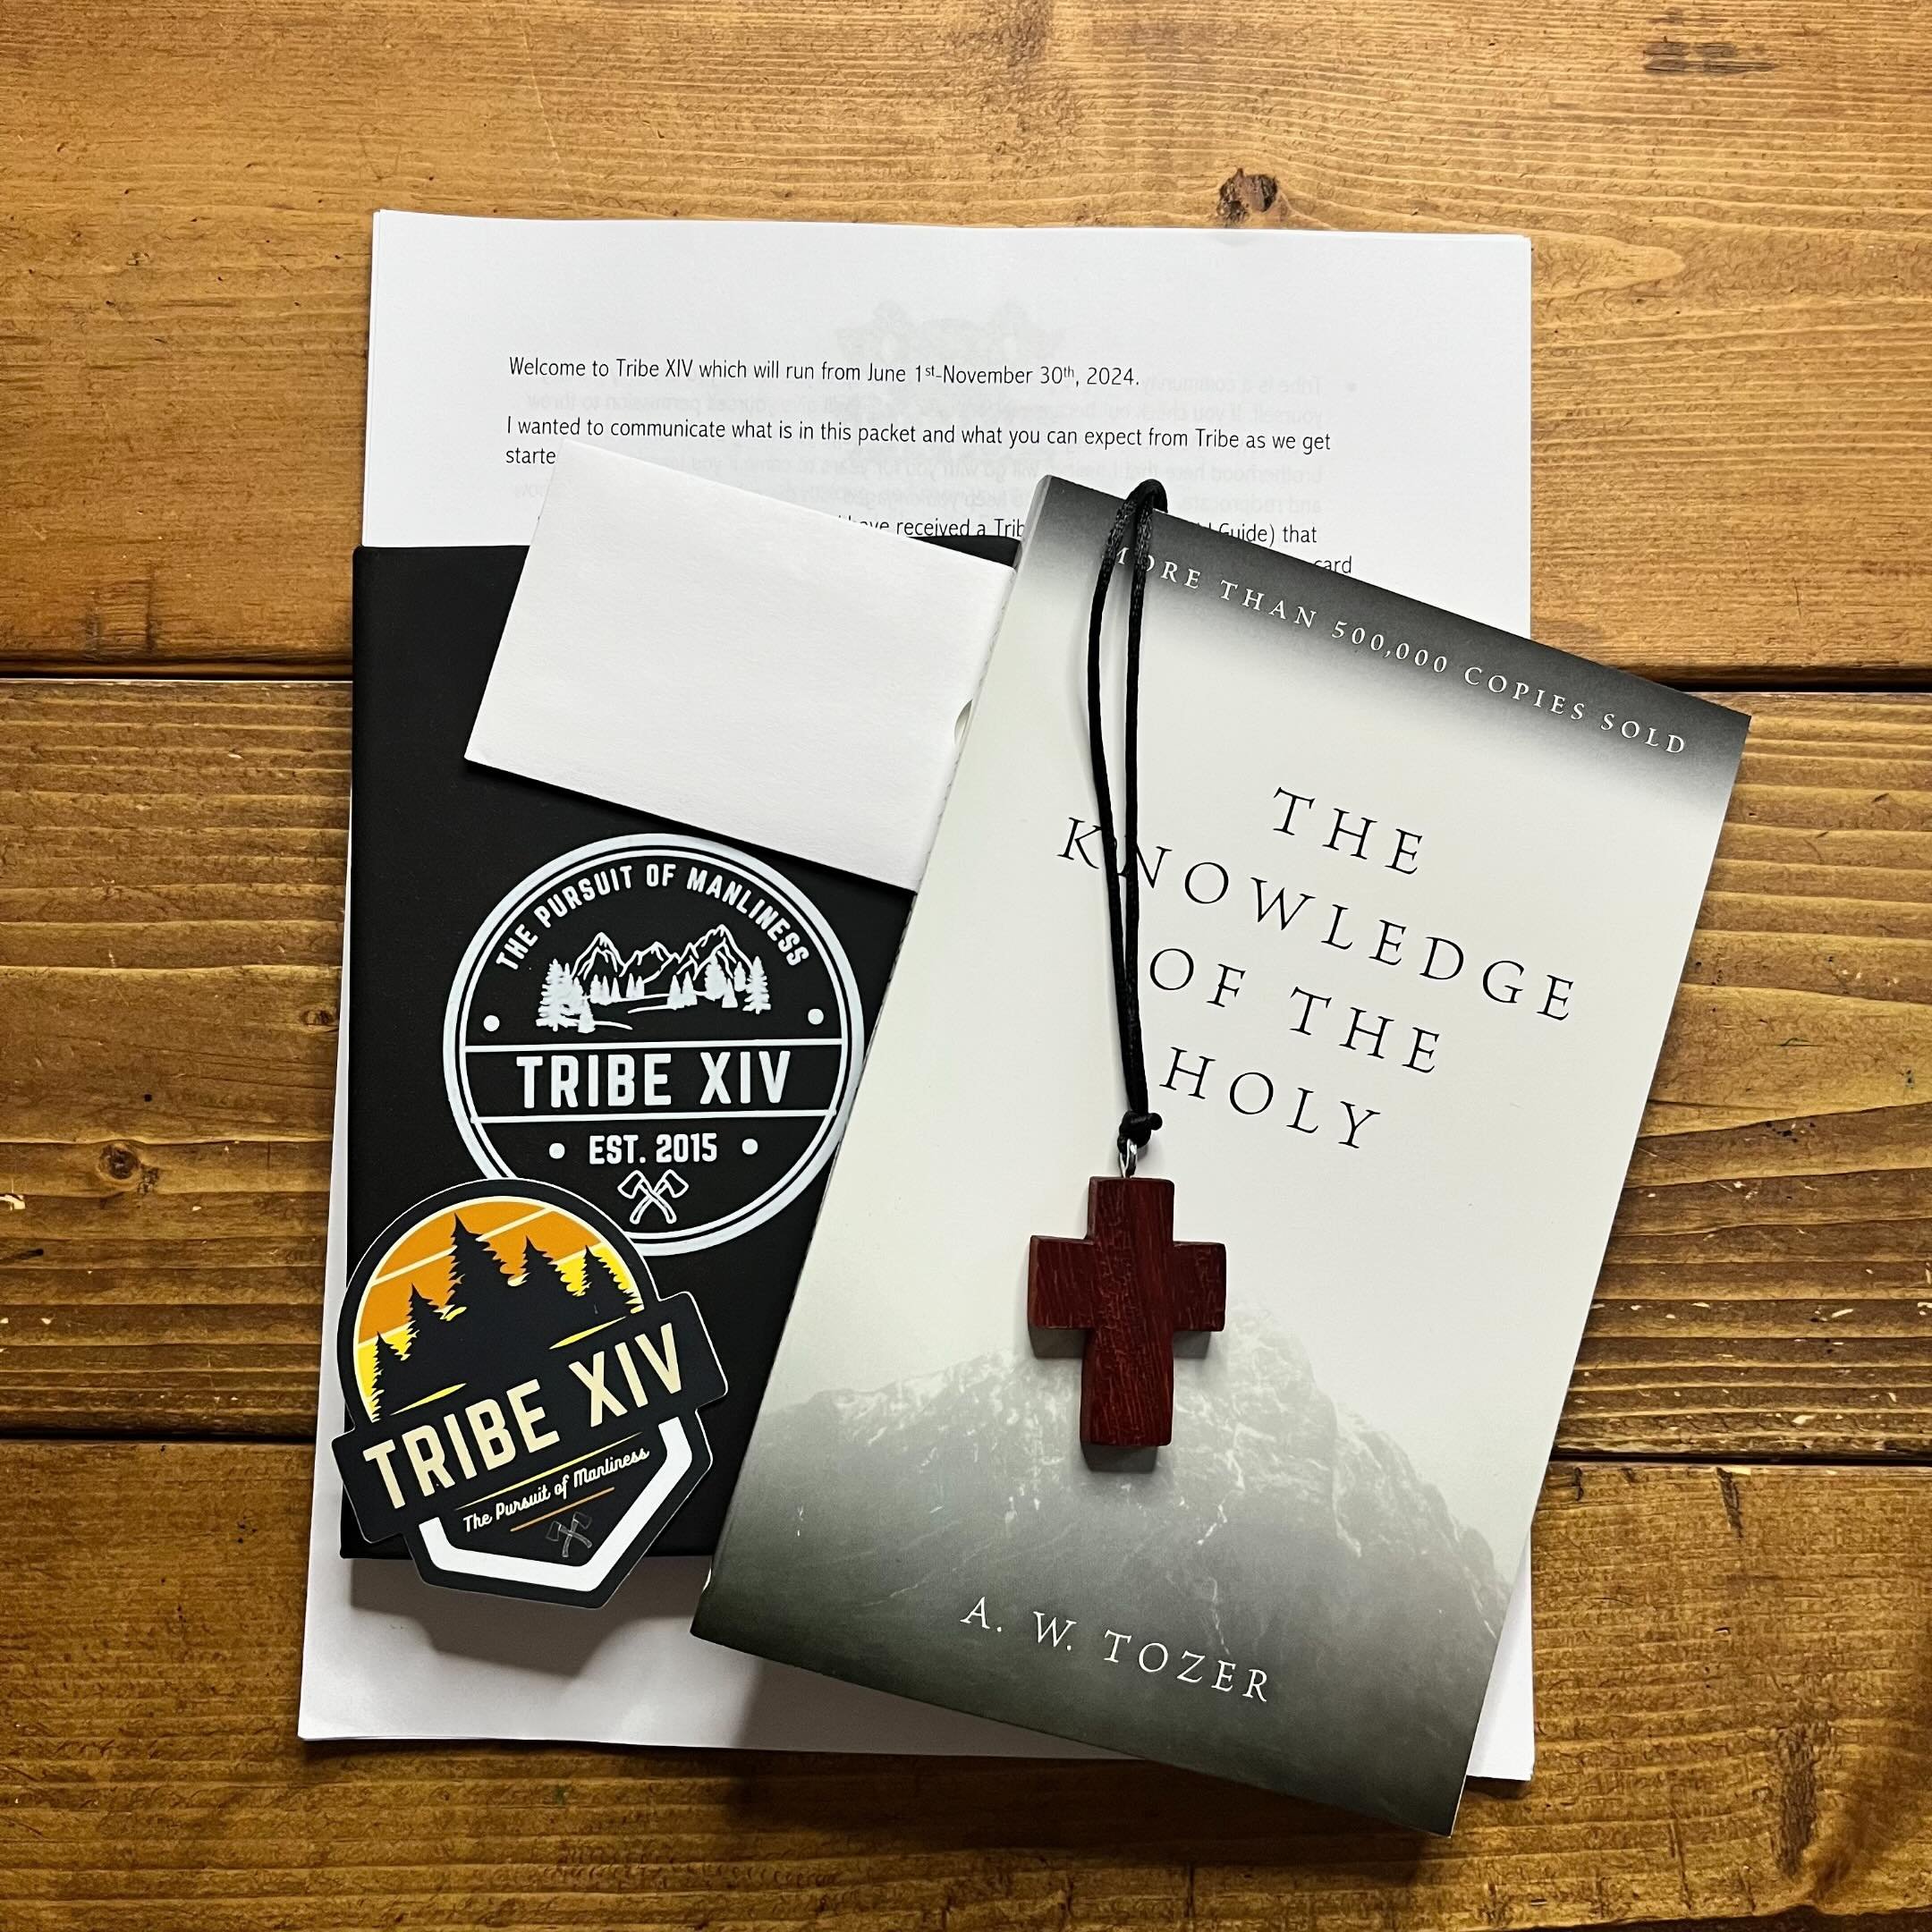 When you register for Tribe XIV you will receive in your first package: 
- Knowledge of The Holy by A.W. Tozer
- Tribe XIV Journal 
- Tribe XIV Covenant and Field Guide
- Custom Cross Necklace 
- Tribe XIV decal 
- Prayer Card with the name of anothe